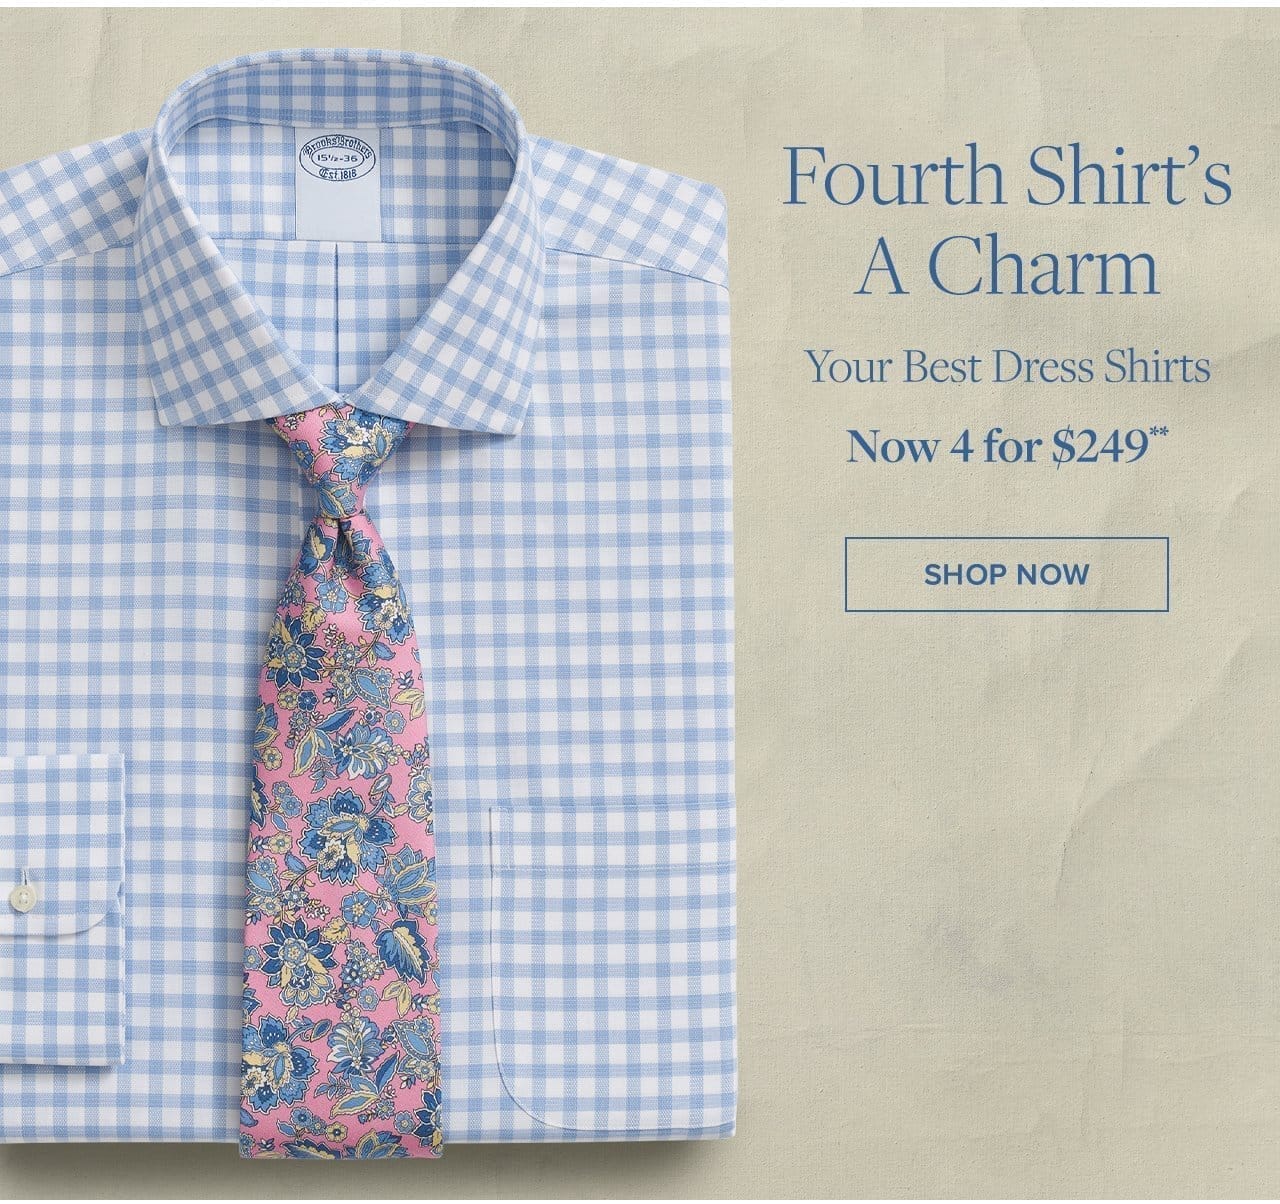 Fourth Shirt's A Charm Your Best Dress Shirts Now 4 for \\$249 Shop Now